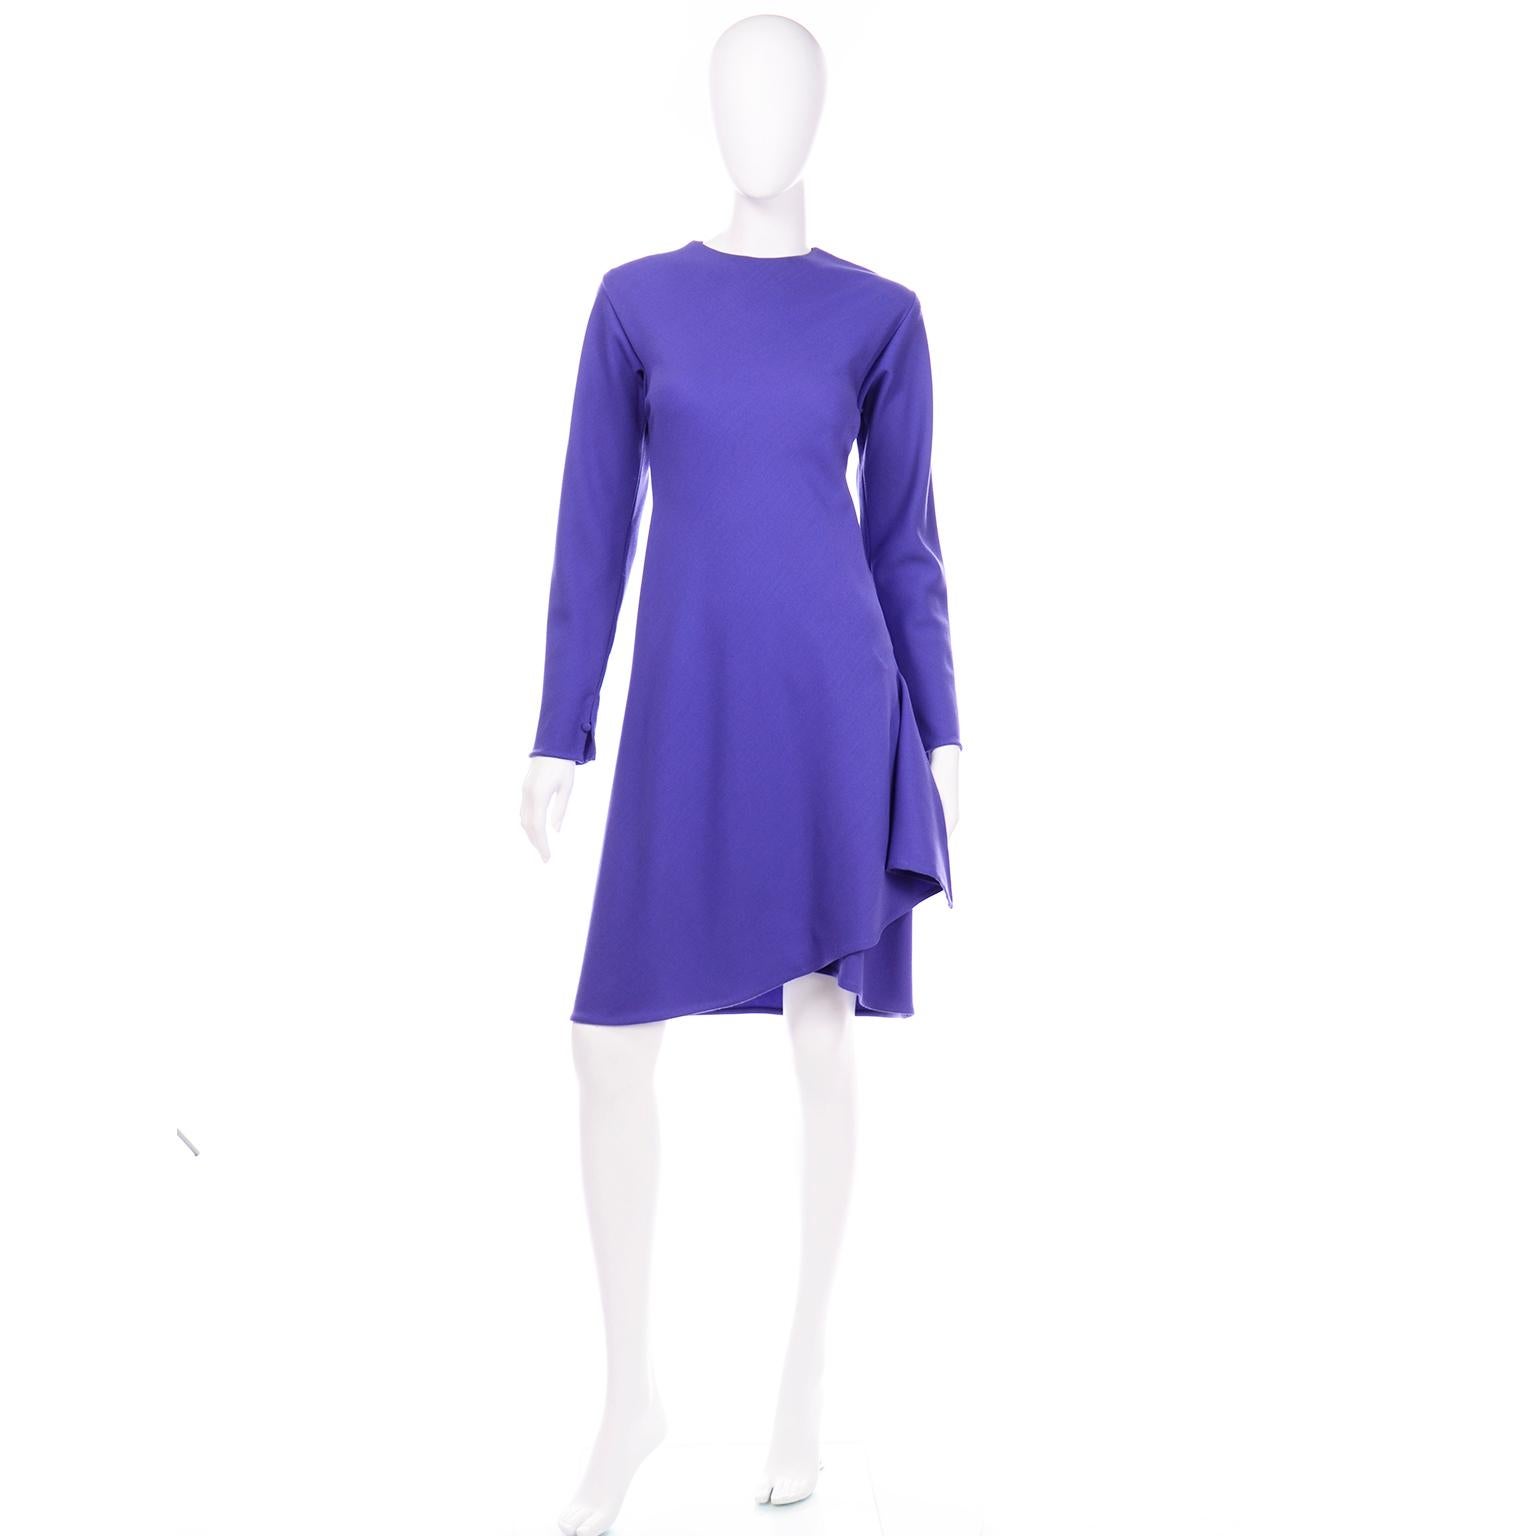 This wonderful vintage Halston jersey dress is in a beautiful shade of purple lightweight wool. At first glance, the dress looks deceivingly simple, but when you put it on, you instantly become aware of the unique Halston touches that make it